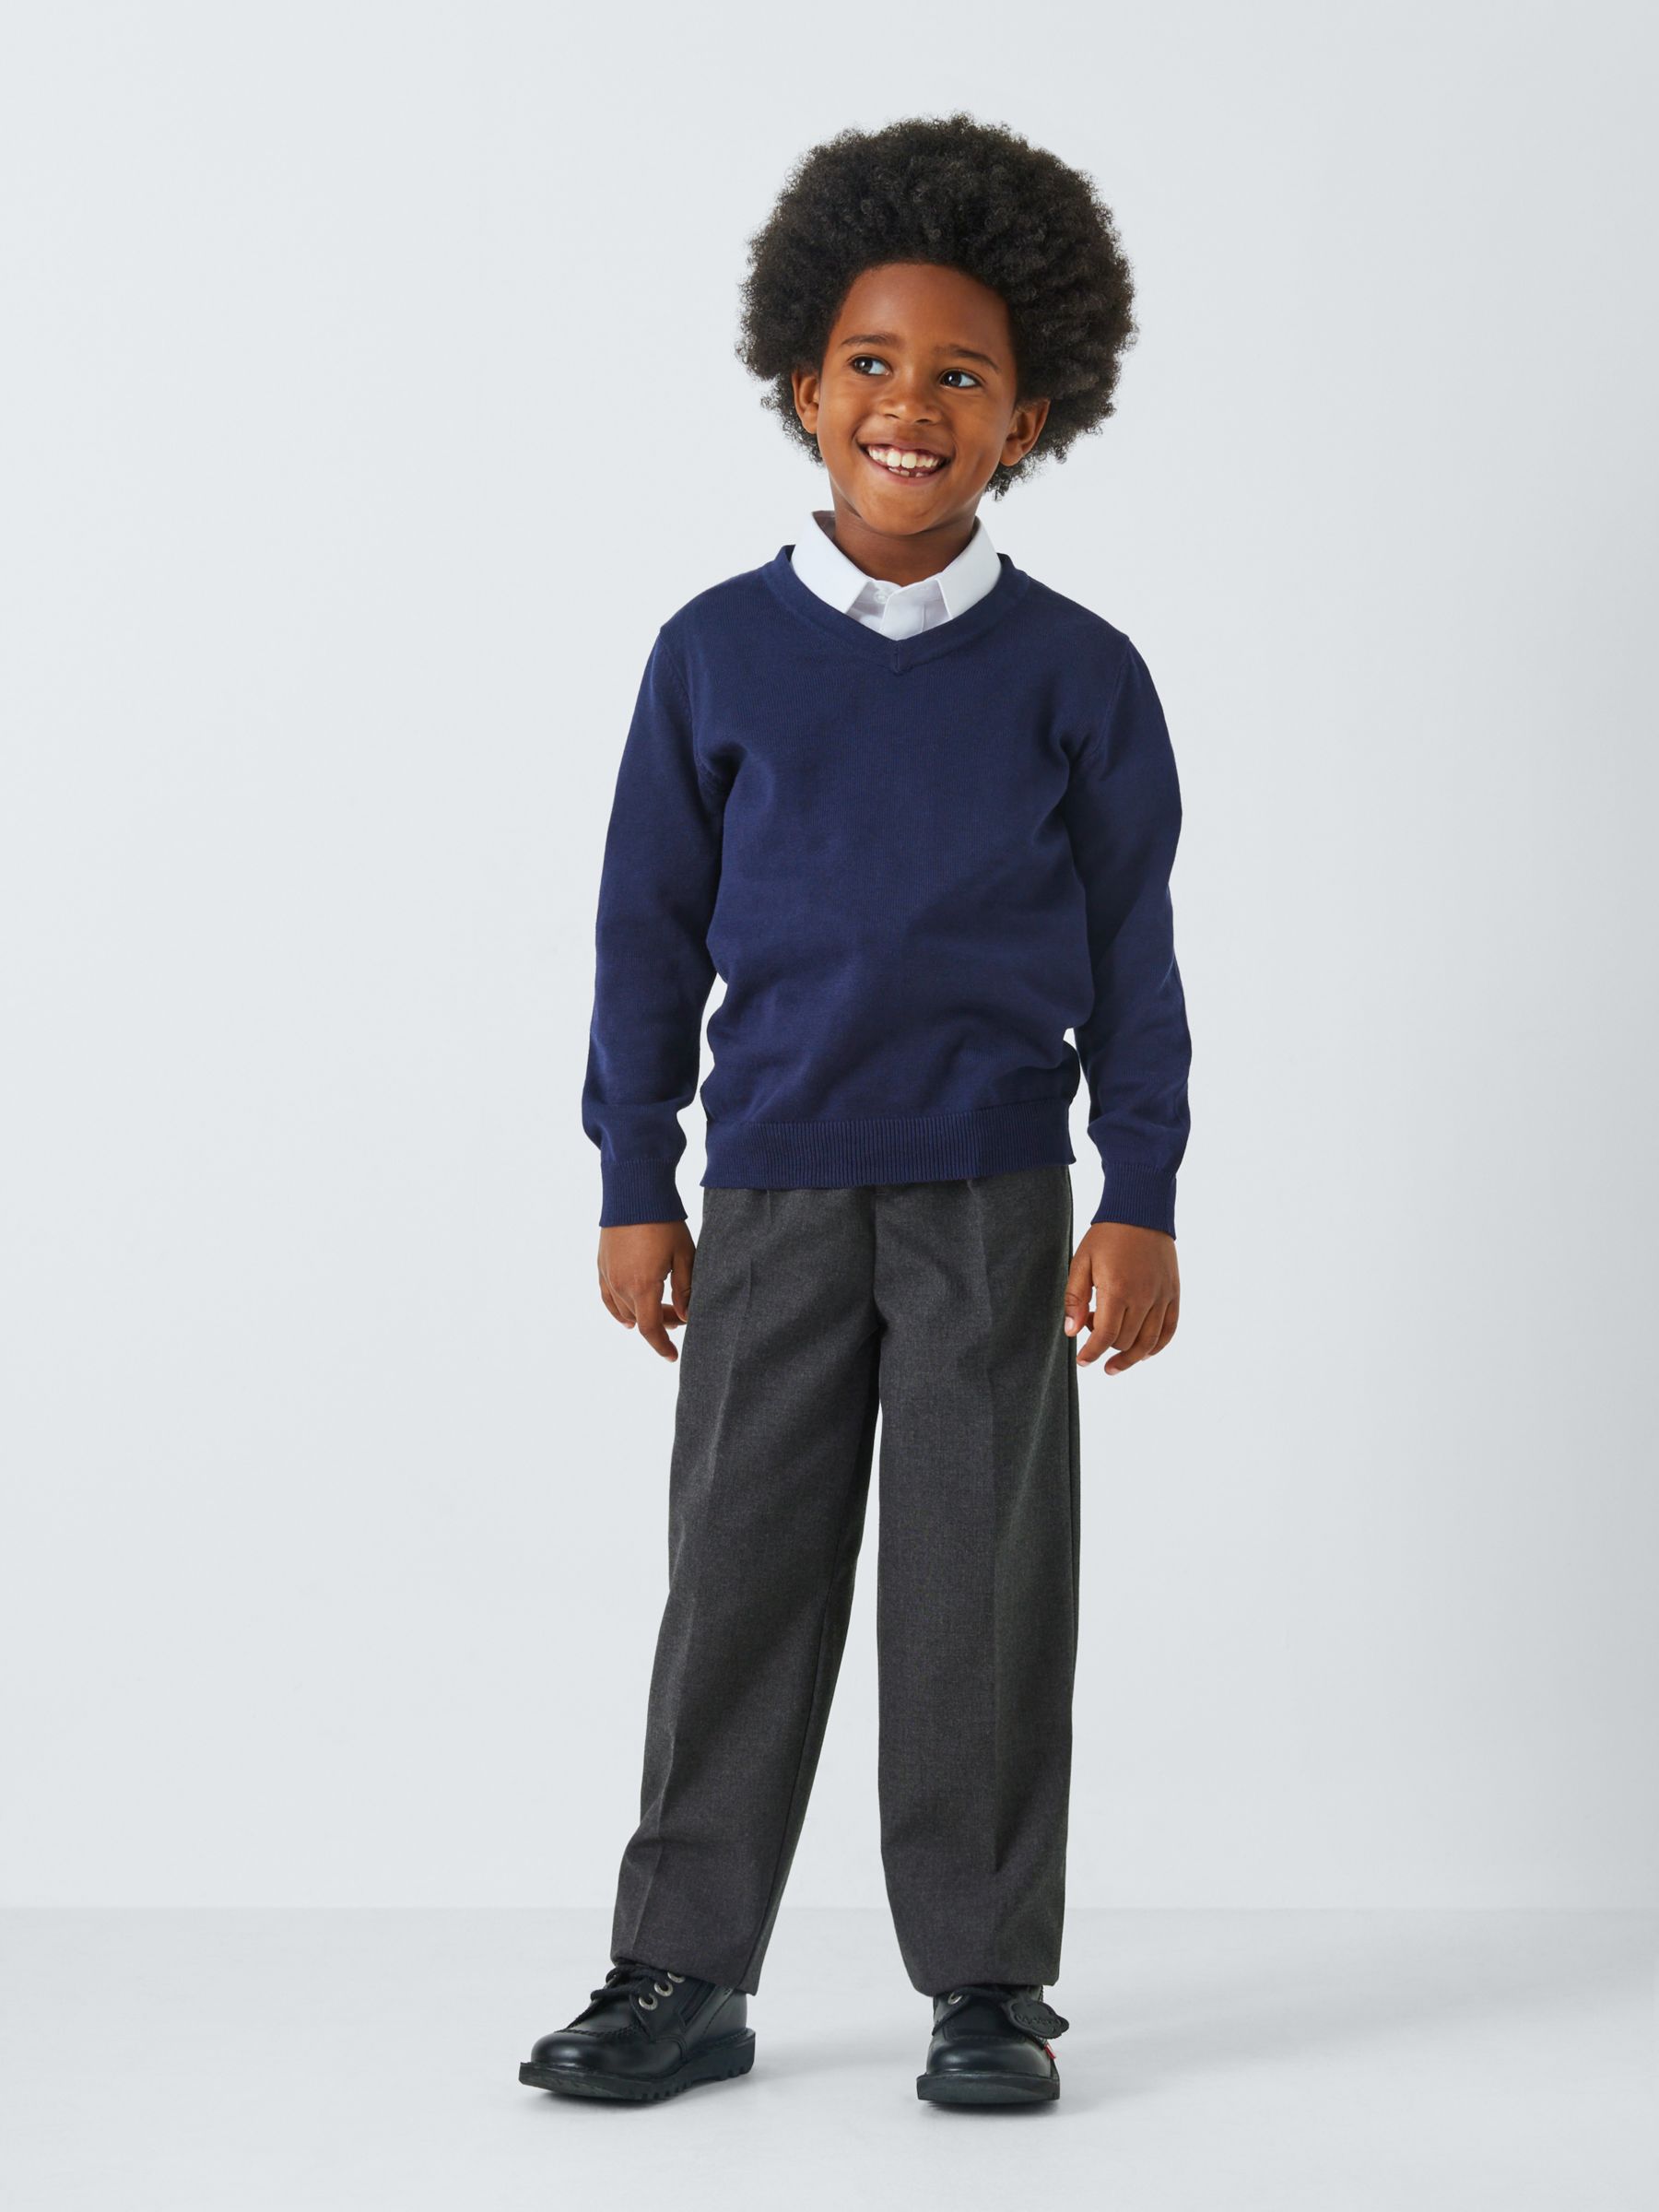 John Lewis ANYDAY Adjustable Waist Boys' School Trousers, Pack of 2, Grey, 3 years